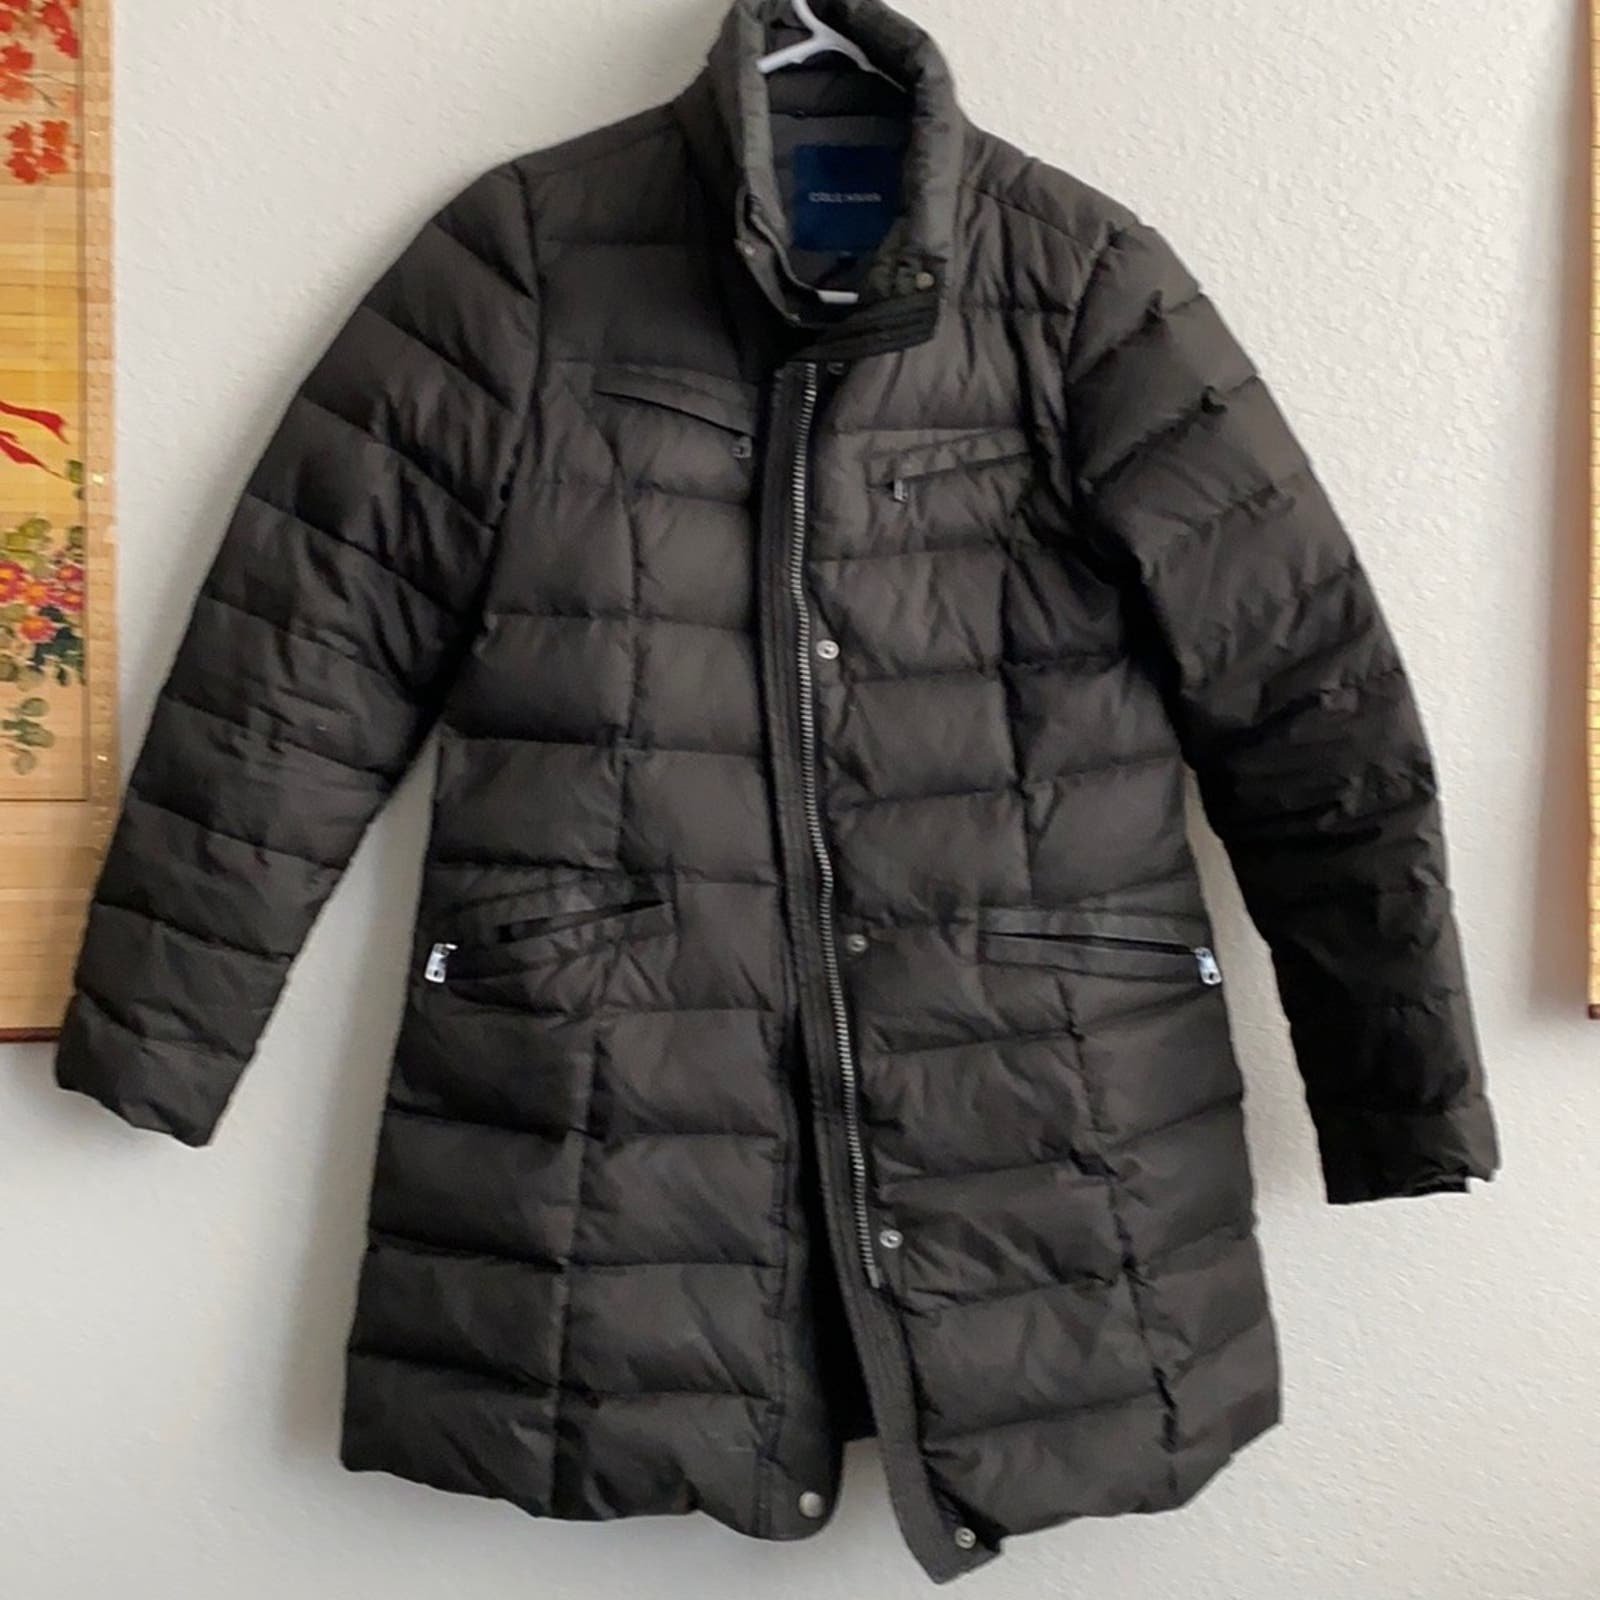 Cole Haan Black Quilted Puffer Coat Sz M dZ1xRs4gb